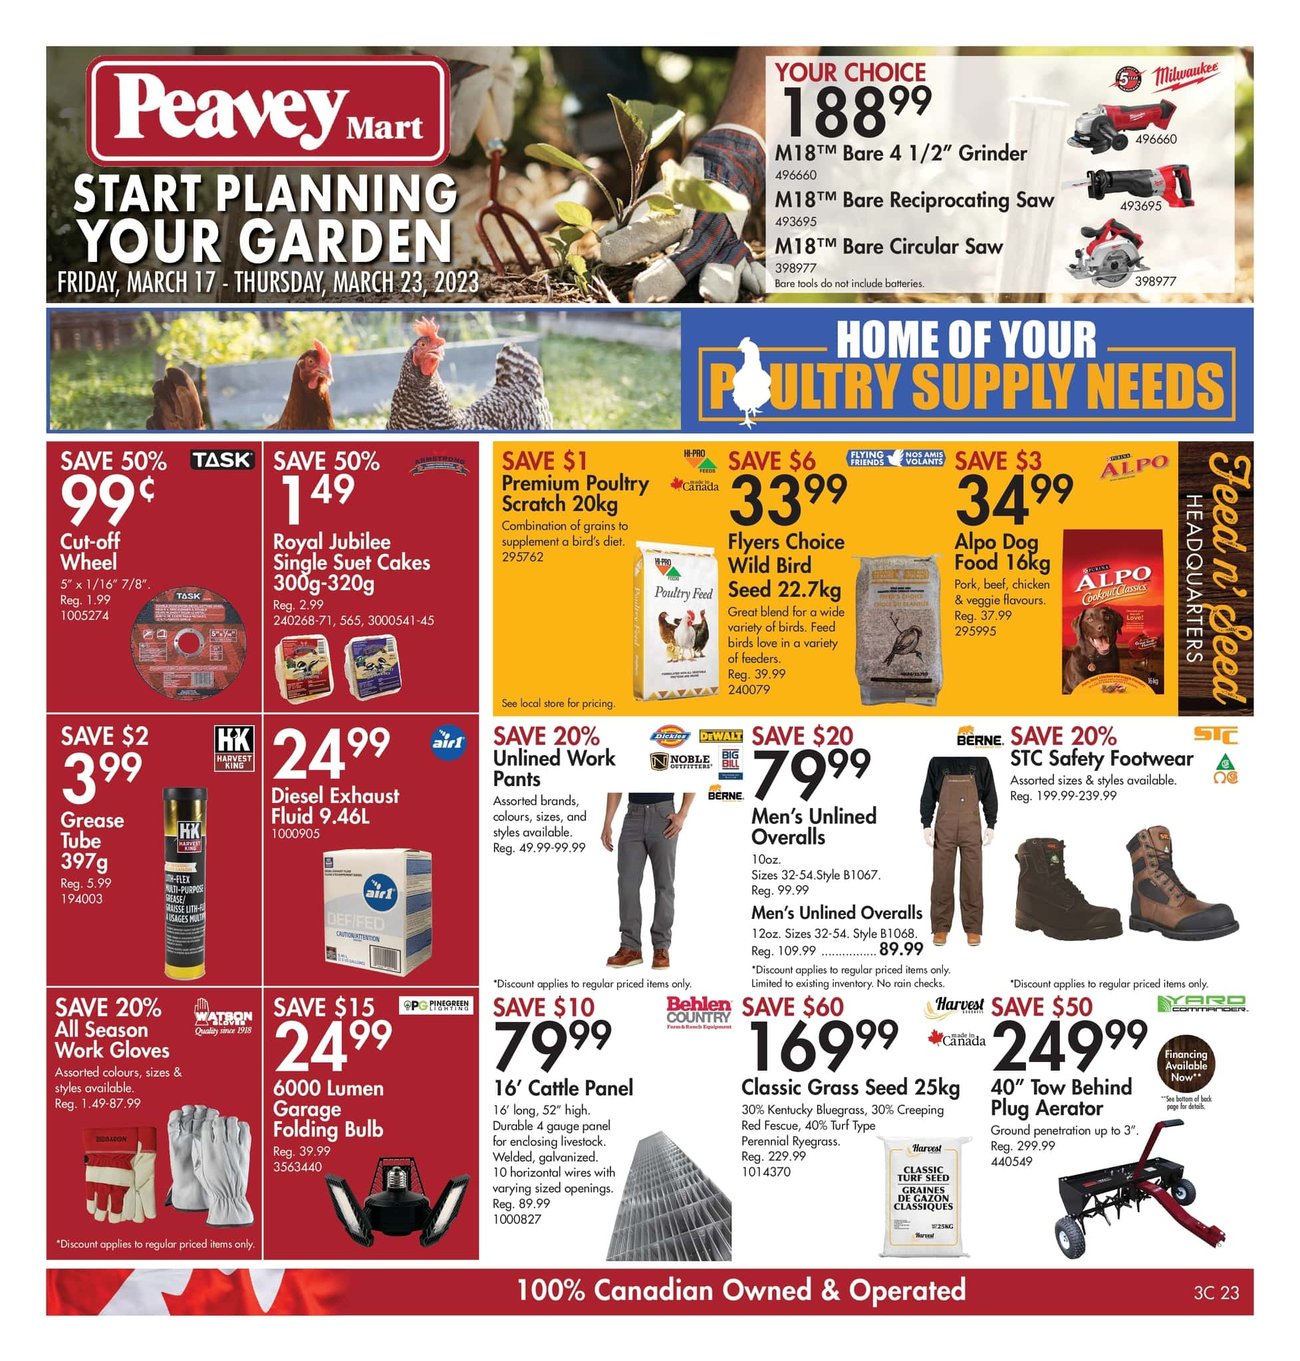 Peavey Mart - Weekly Flyer Specials - Page 1